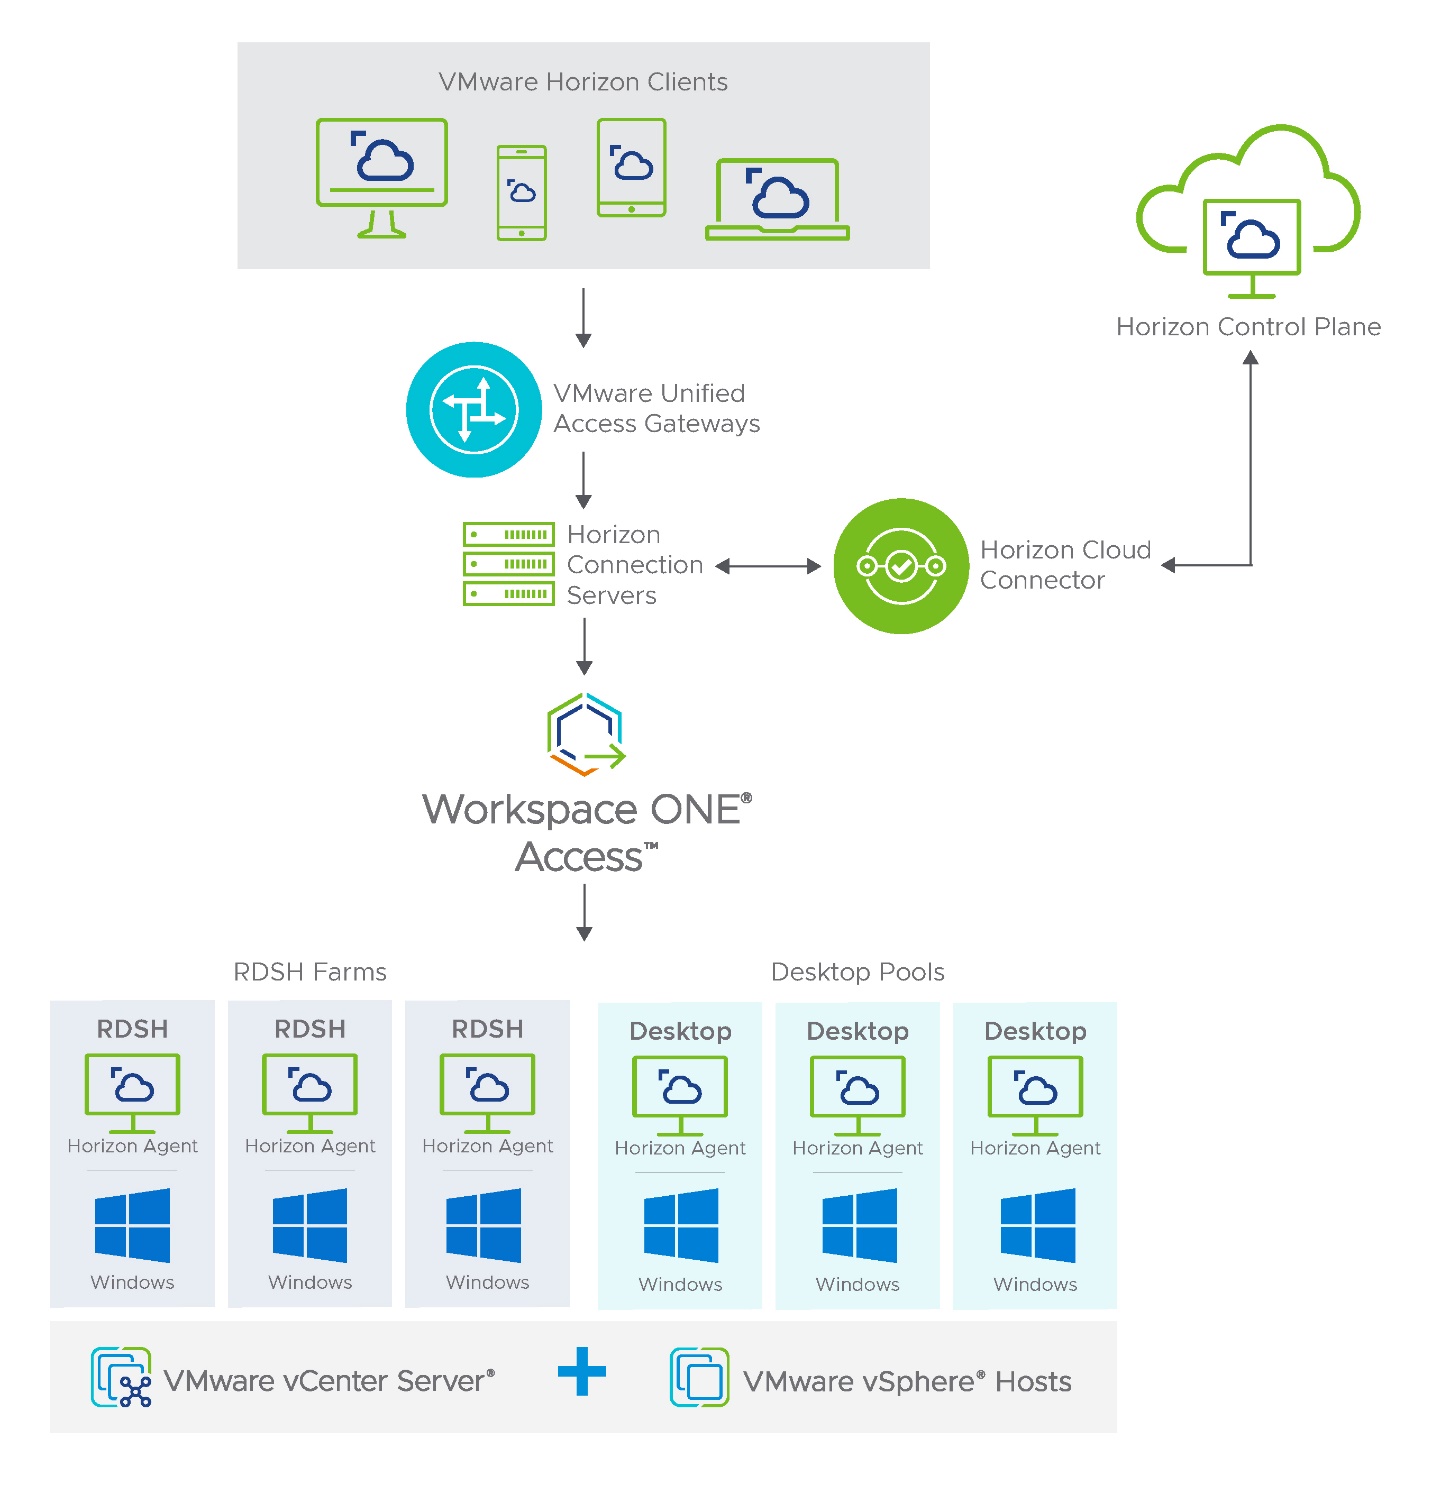 VMware Horizon uses a number of interactive components to deliver virtual desktops and apps across multiple platforms.